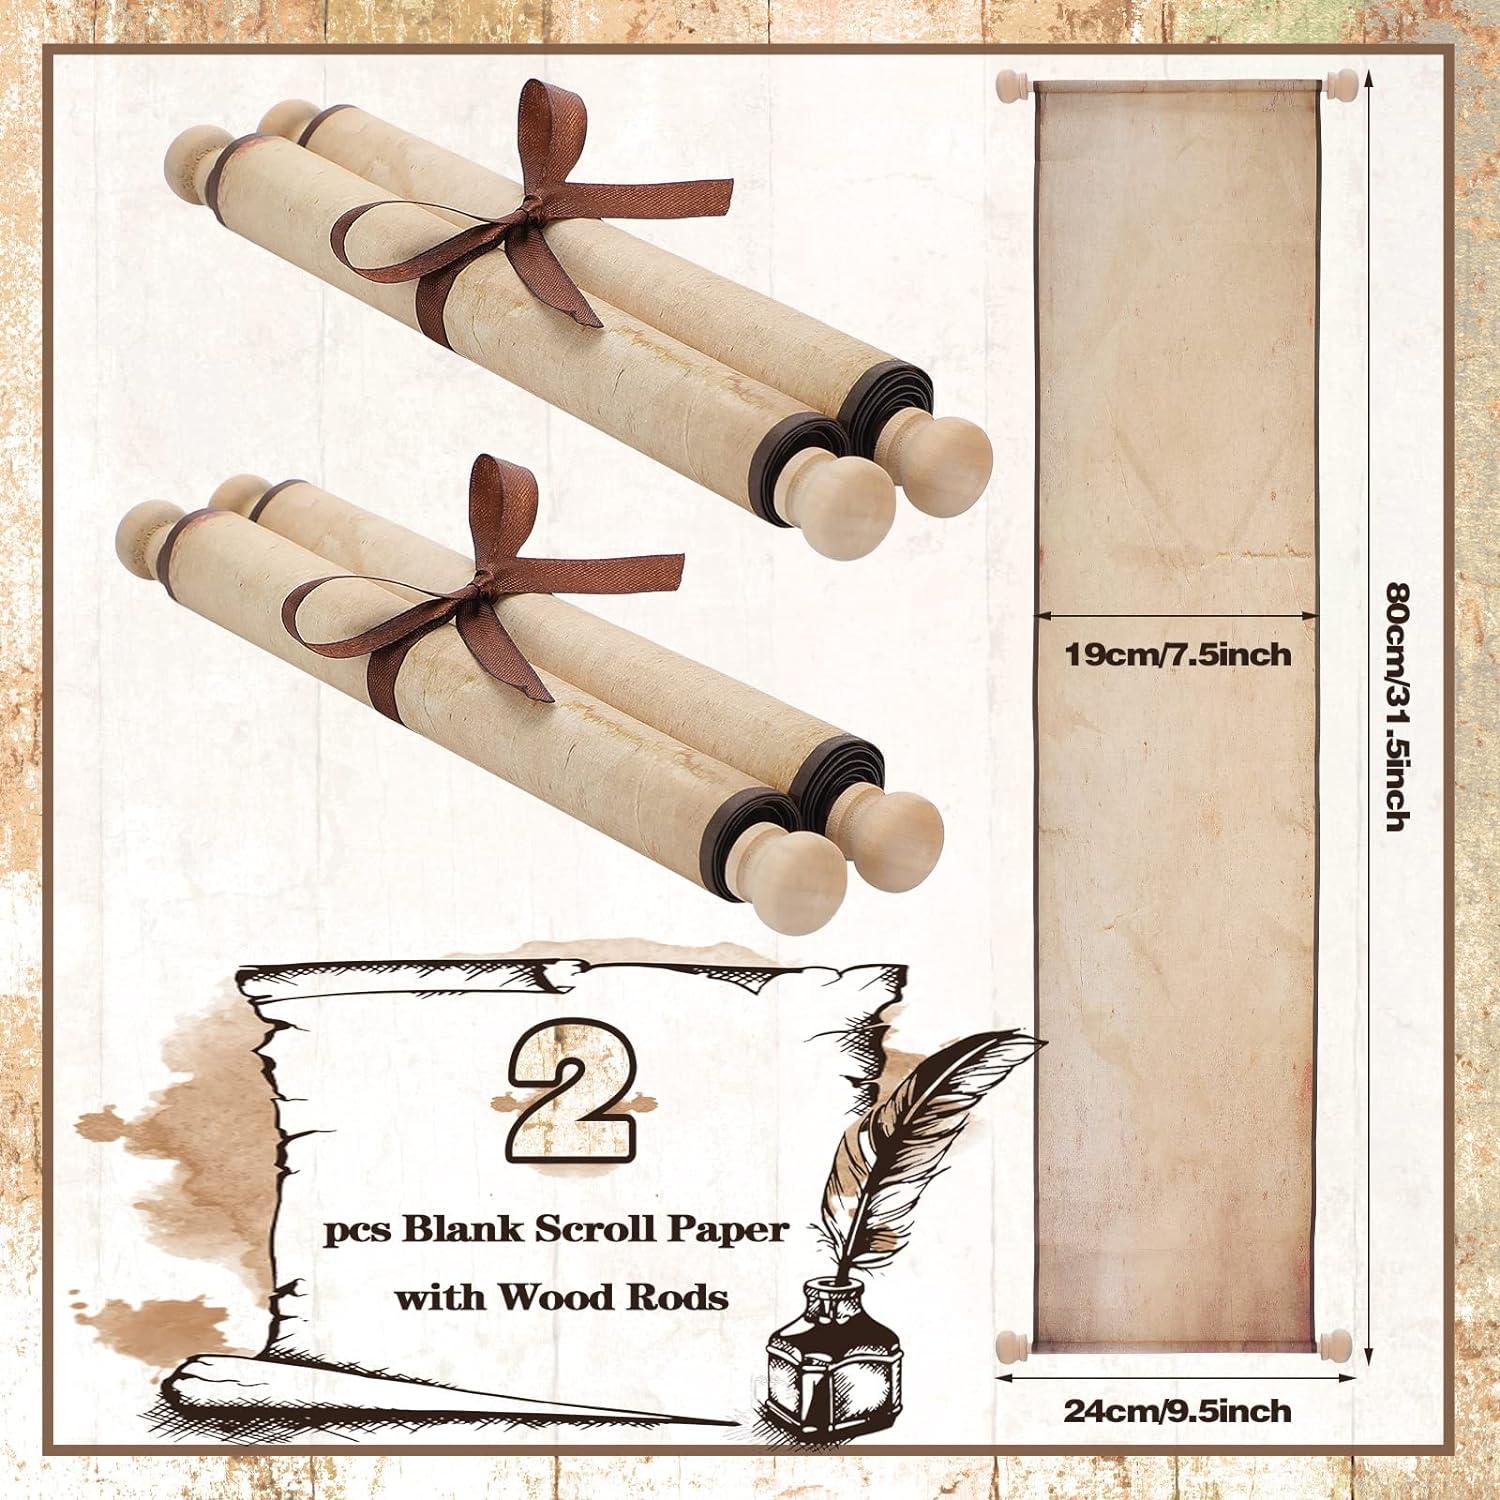 2 Pack Blank Paper Scrolls 7.5 x 31 Inches Scroll Paper Wrapped on Wood Rod  for Writing, Drawing, Calligraphy, Wedding Vows, Invitation, Renaissance